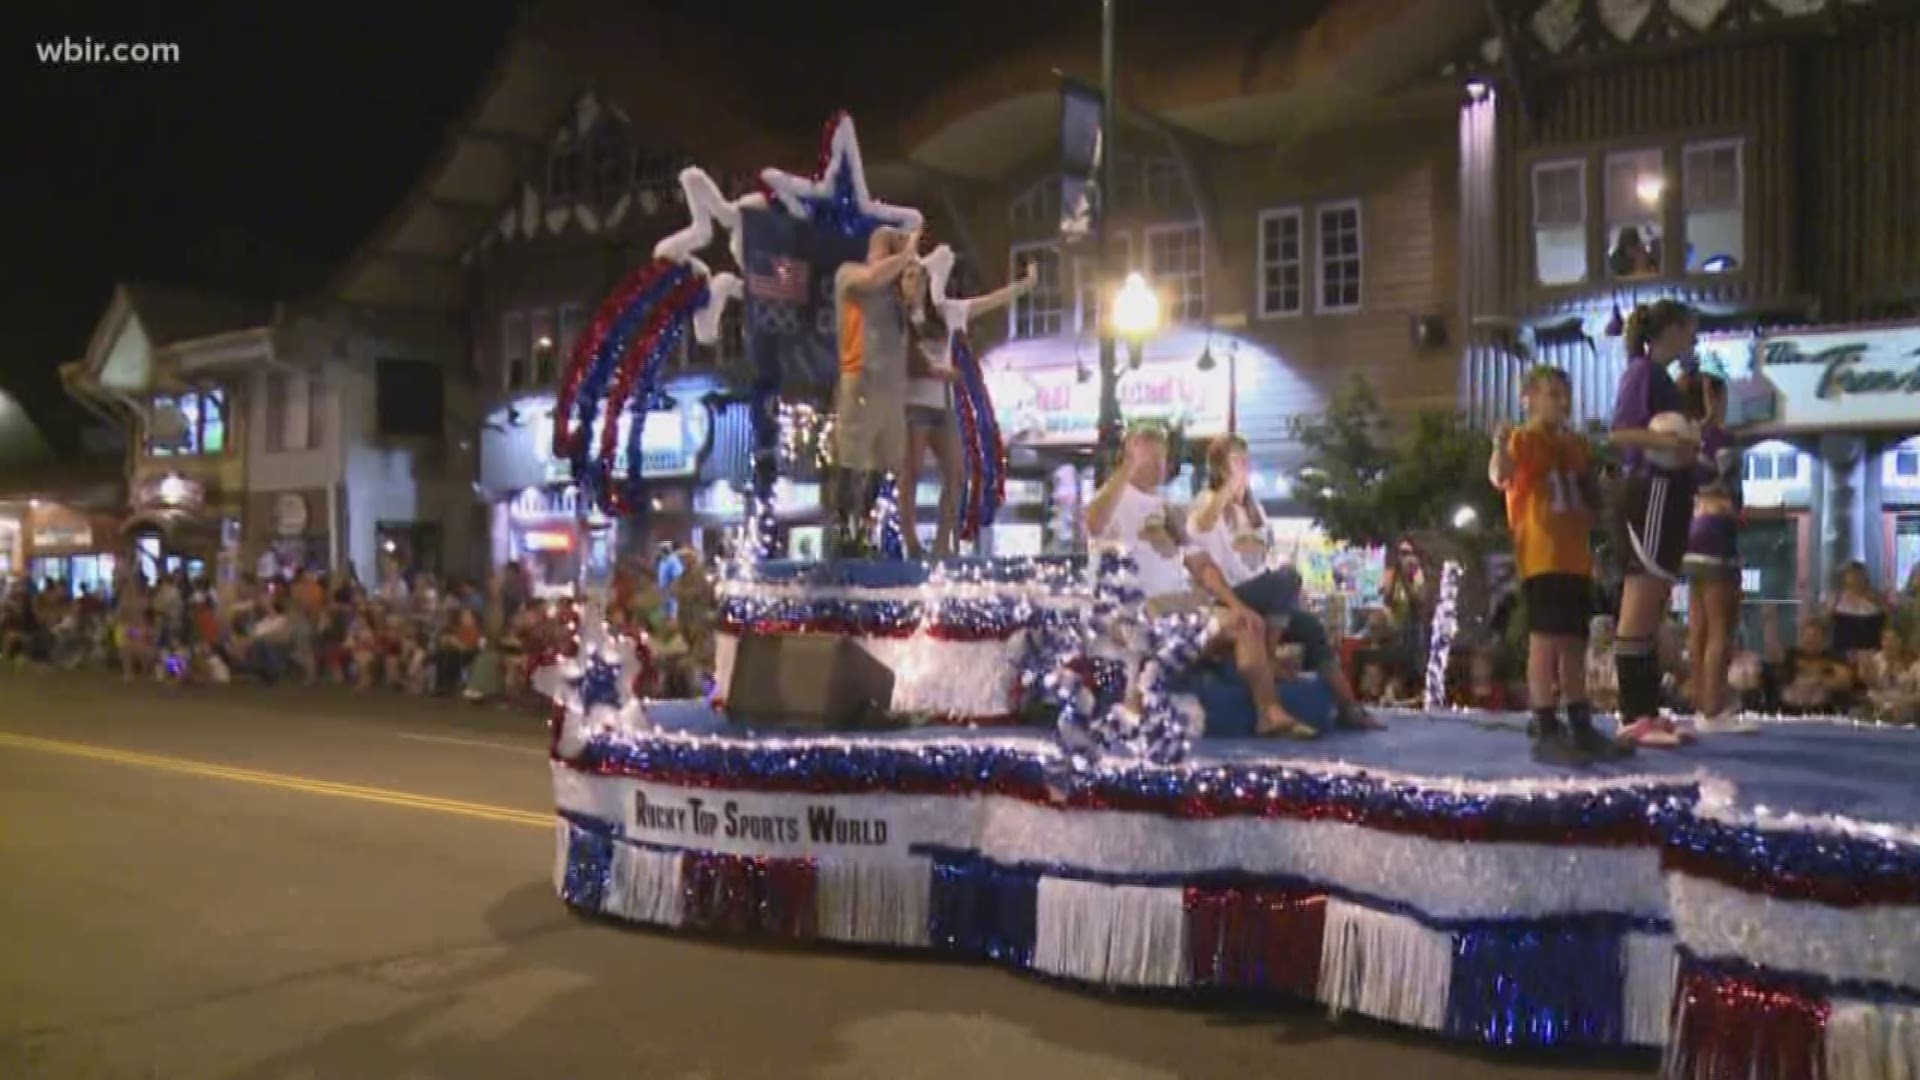 Gatlinburg's 4th of July Midnight Parade Schedule, traffic, more